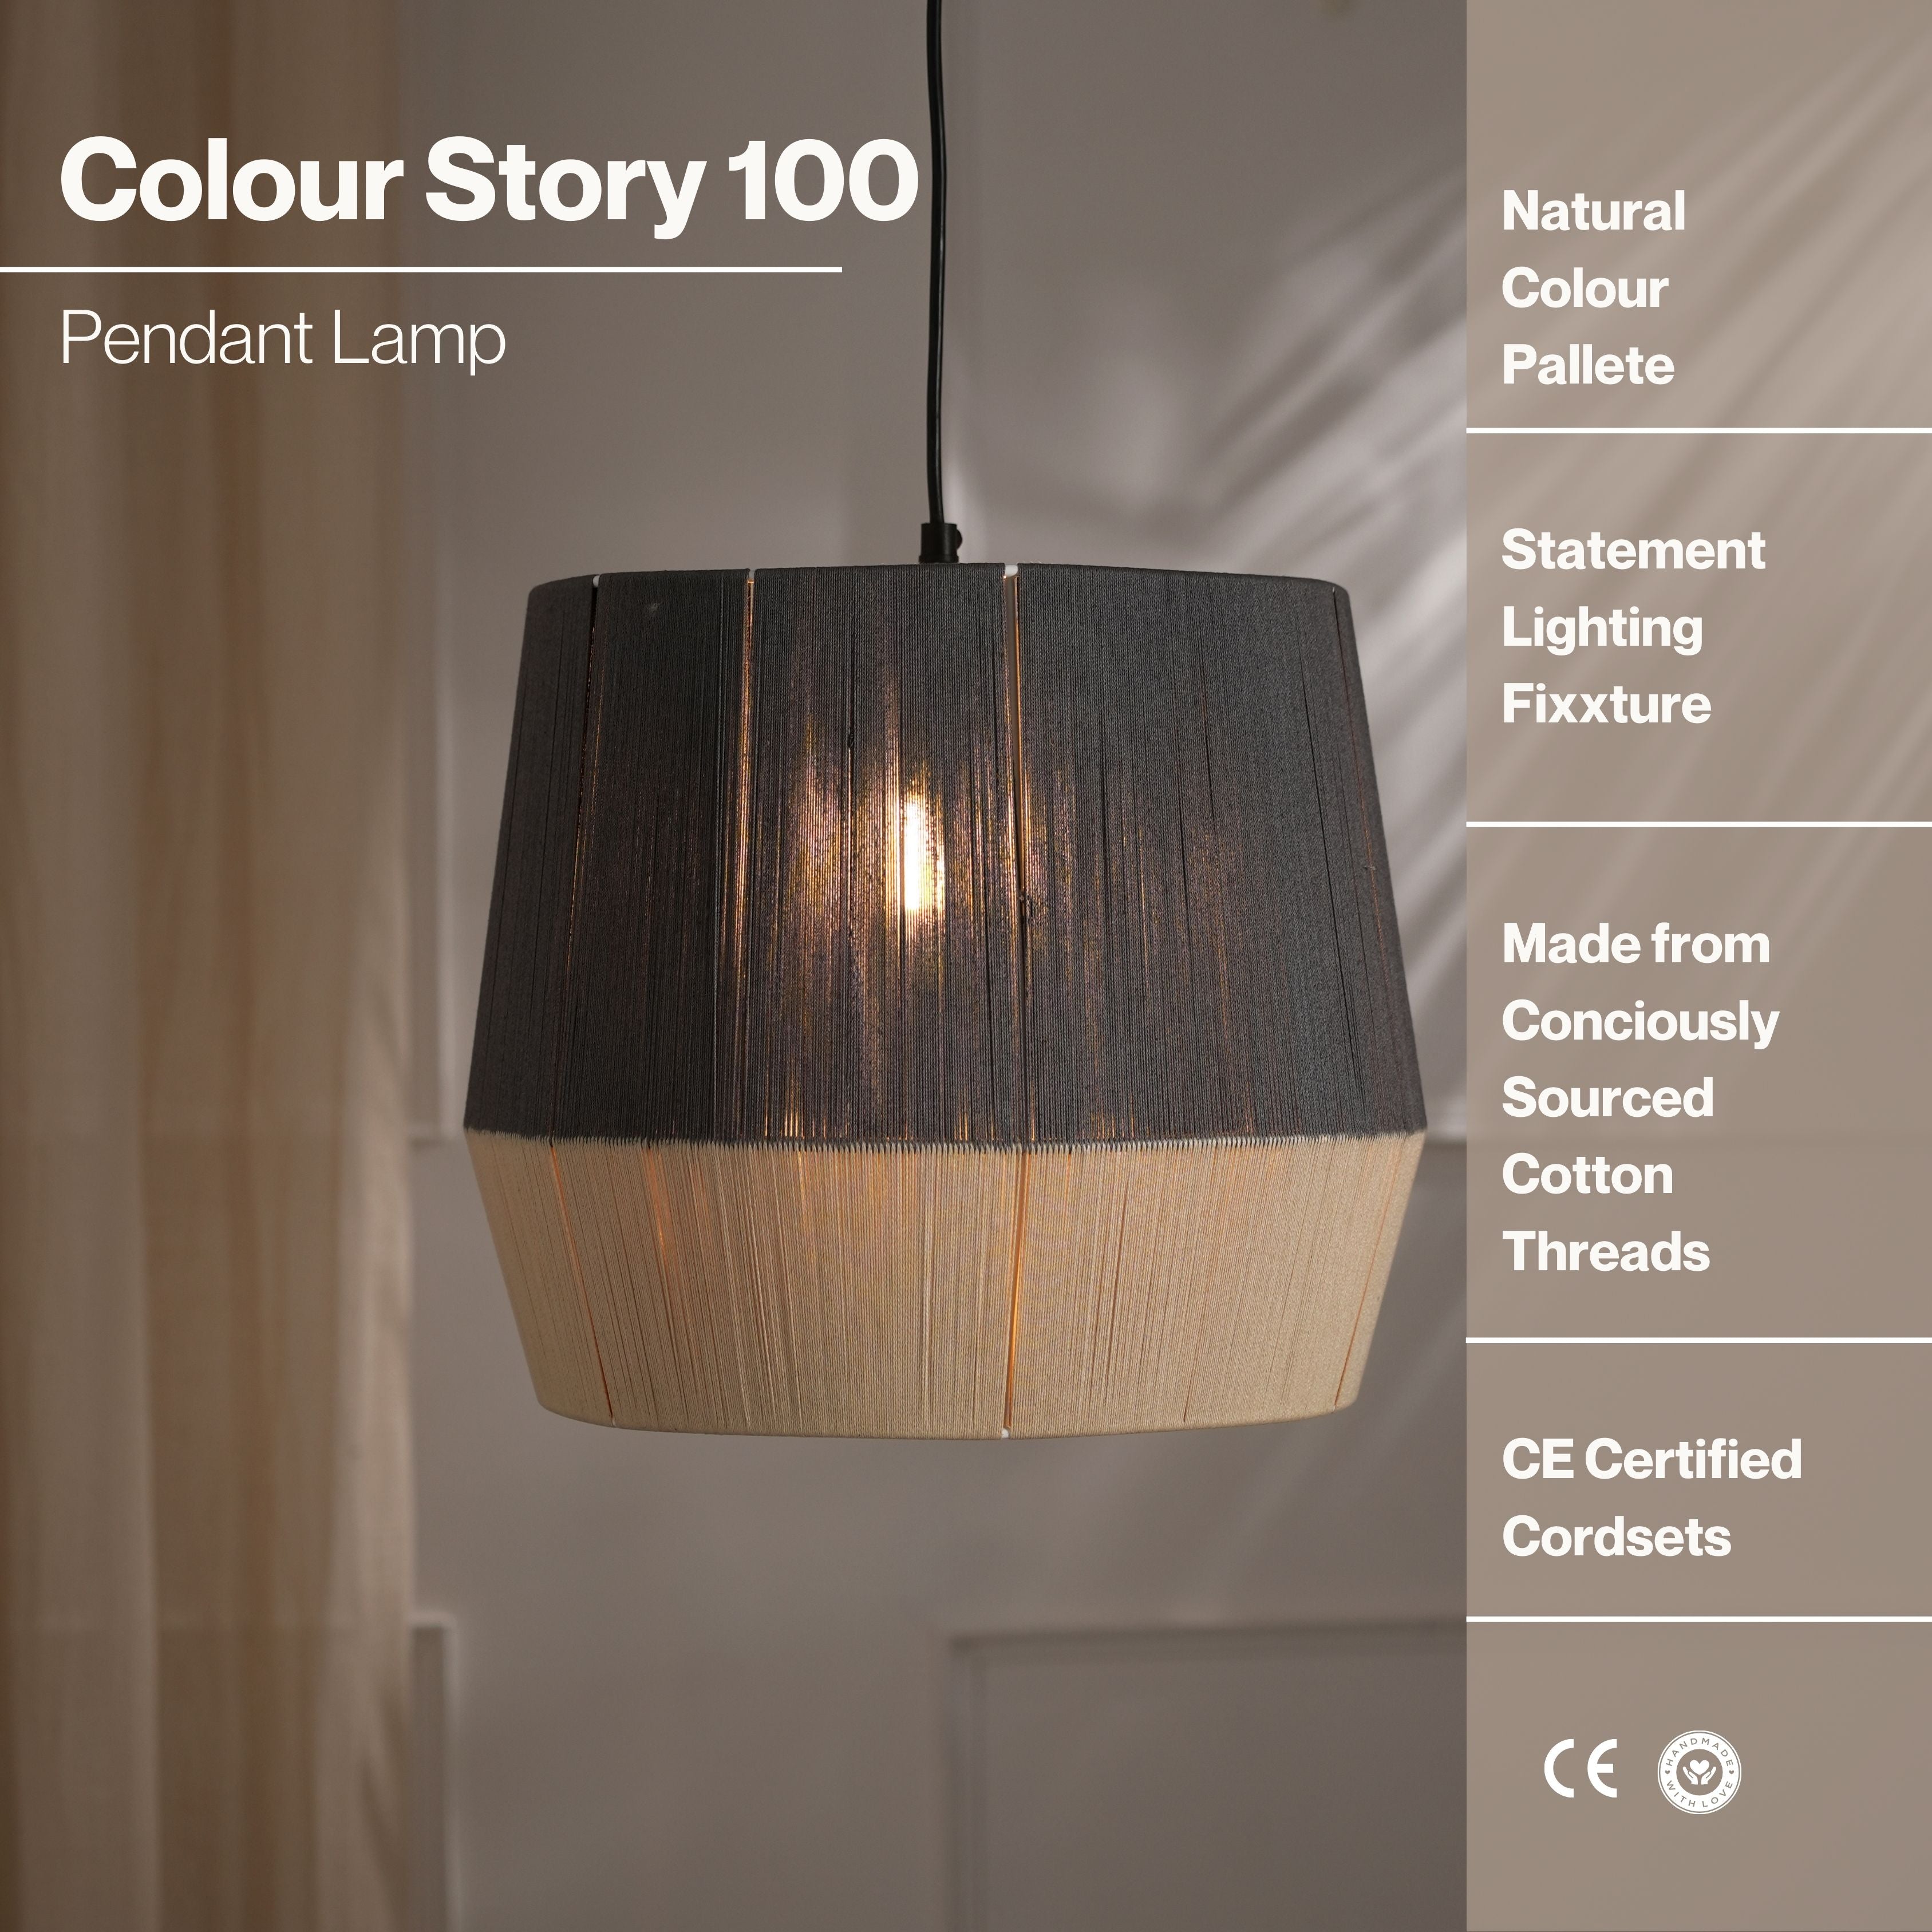 Colour Story 100 Pendant Lamp - Limited Edition Threading Pattern Pendant Light, Cotton Threading Lampshade, Sturdy Construction Hanging Light